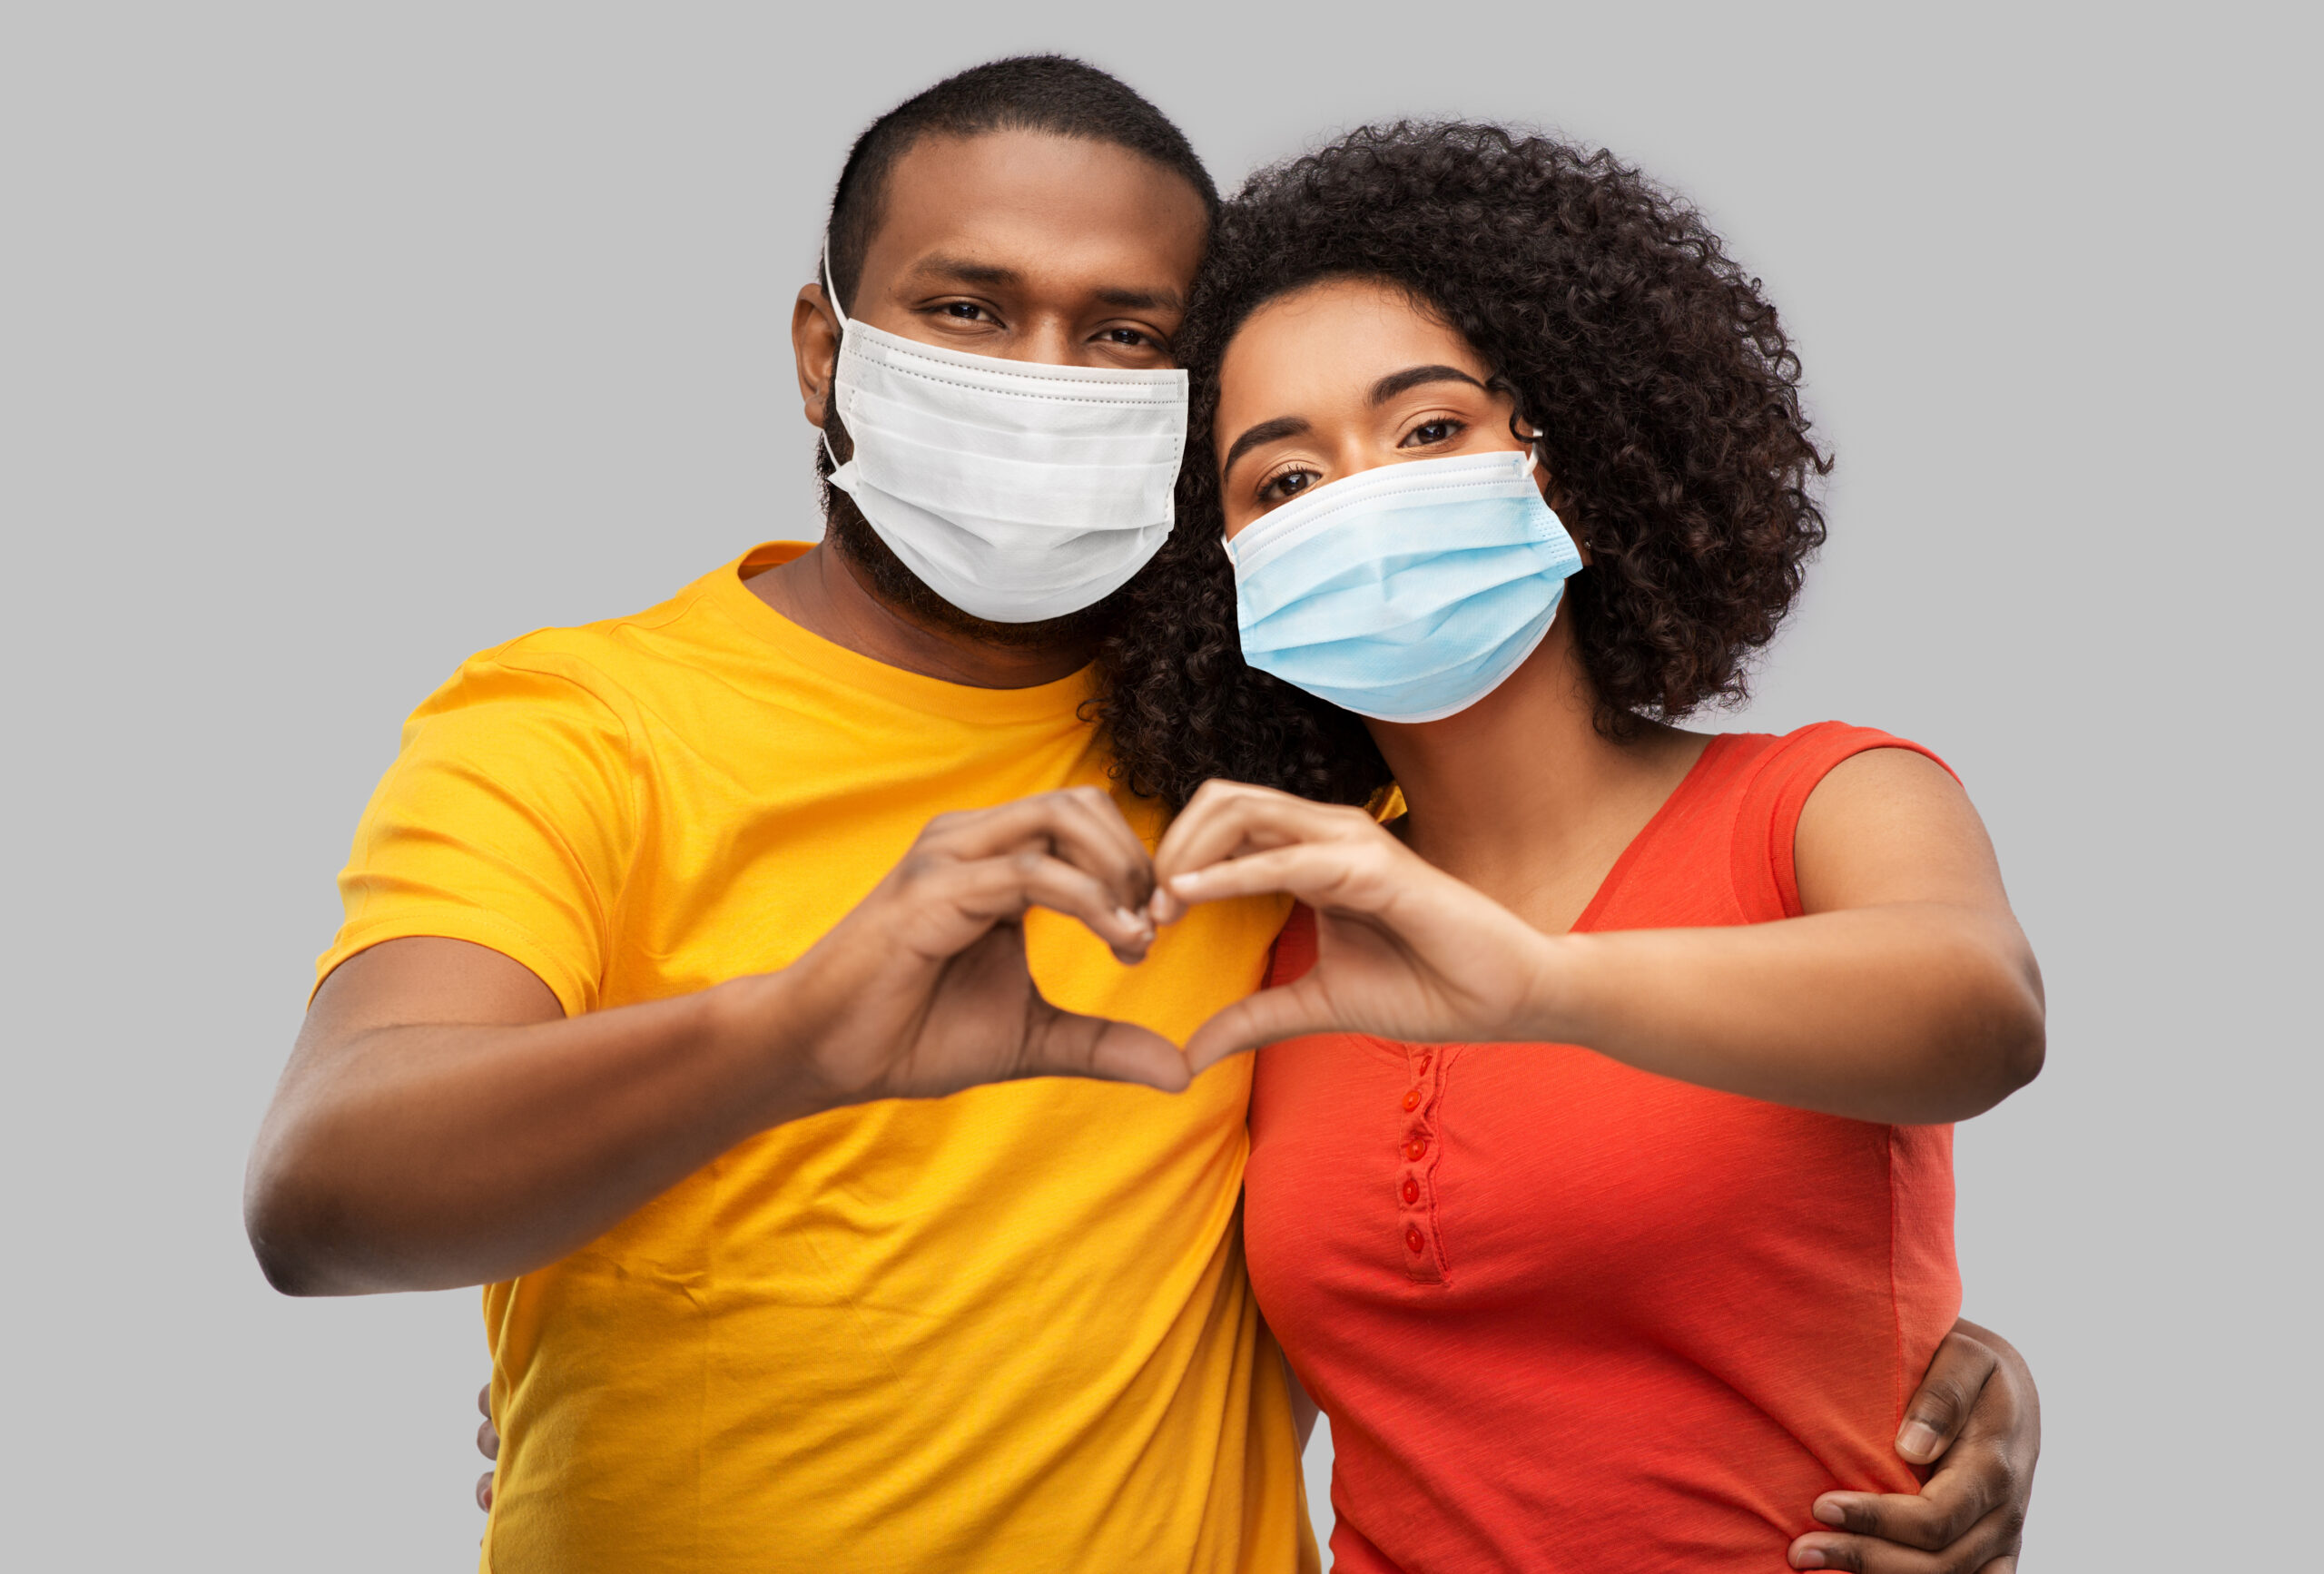 health, quarantine and pandemic concept - happy african american couple wearing protective medical masks for protection from virus making hand heart gesture over grey background